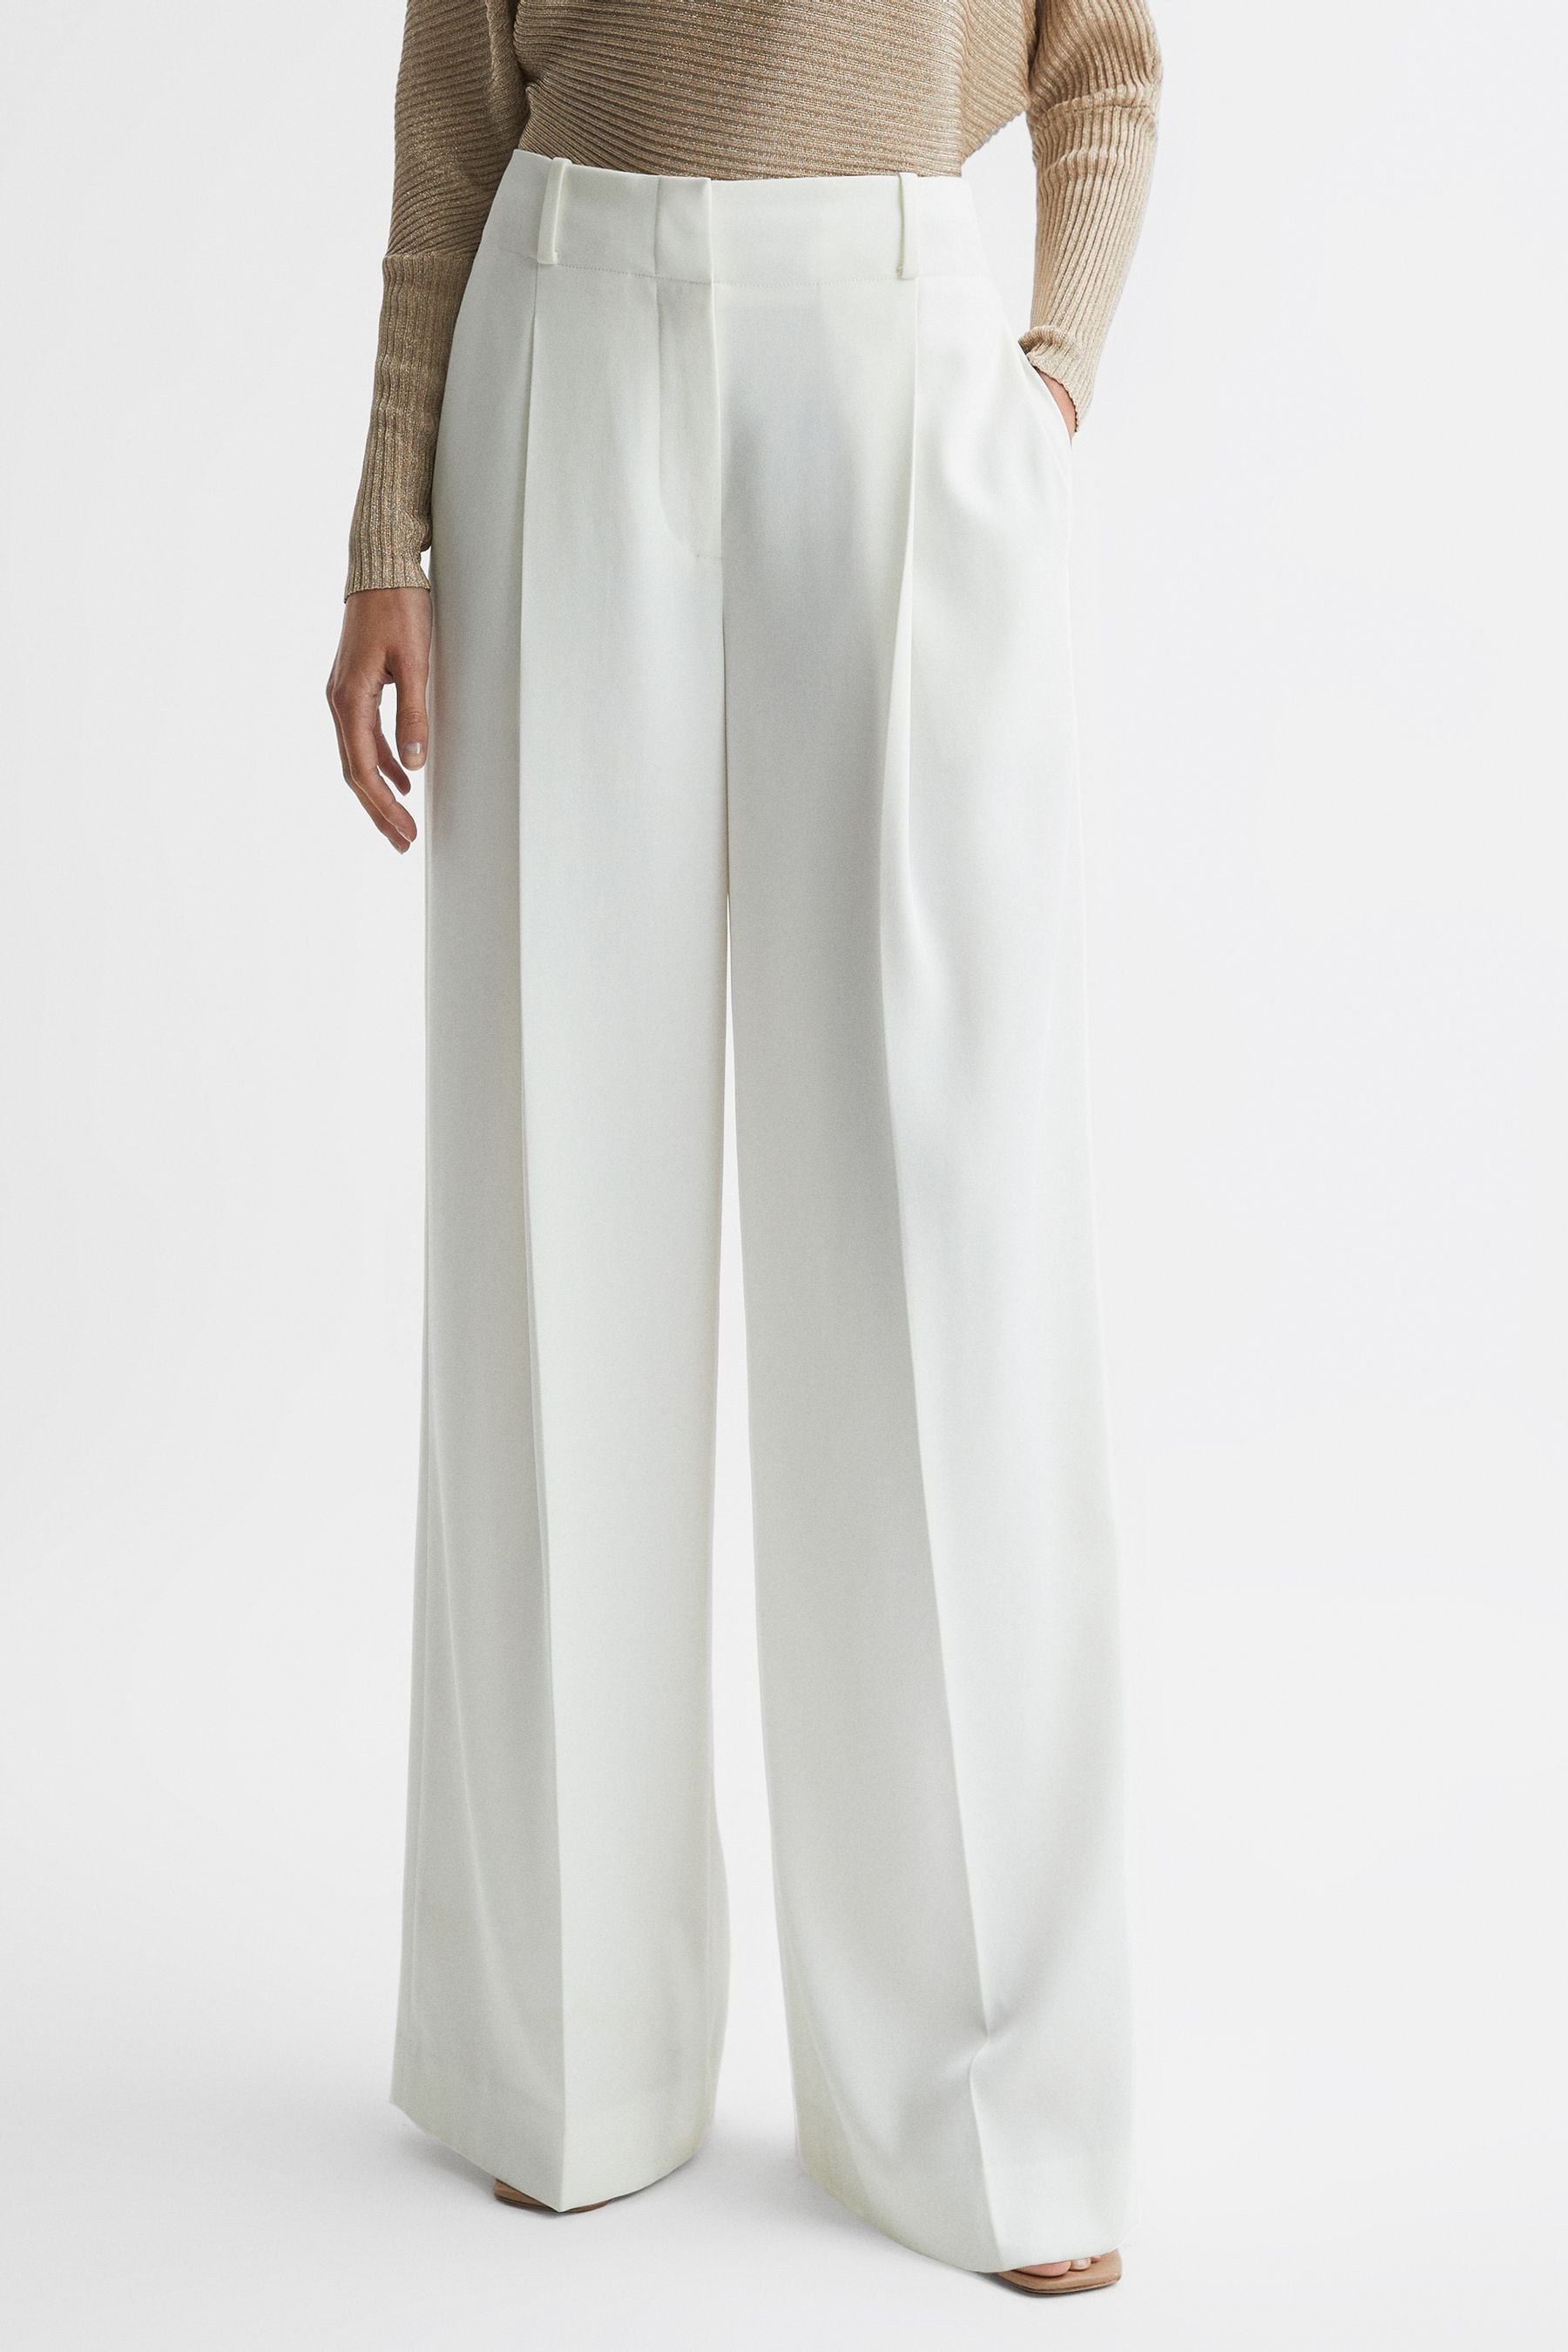 Reiss Lillie - White Mid Rise Wide Leg Trousers, Us 12